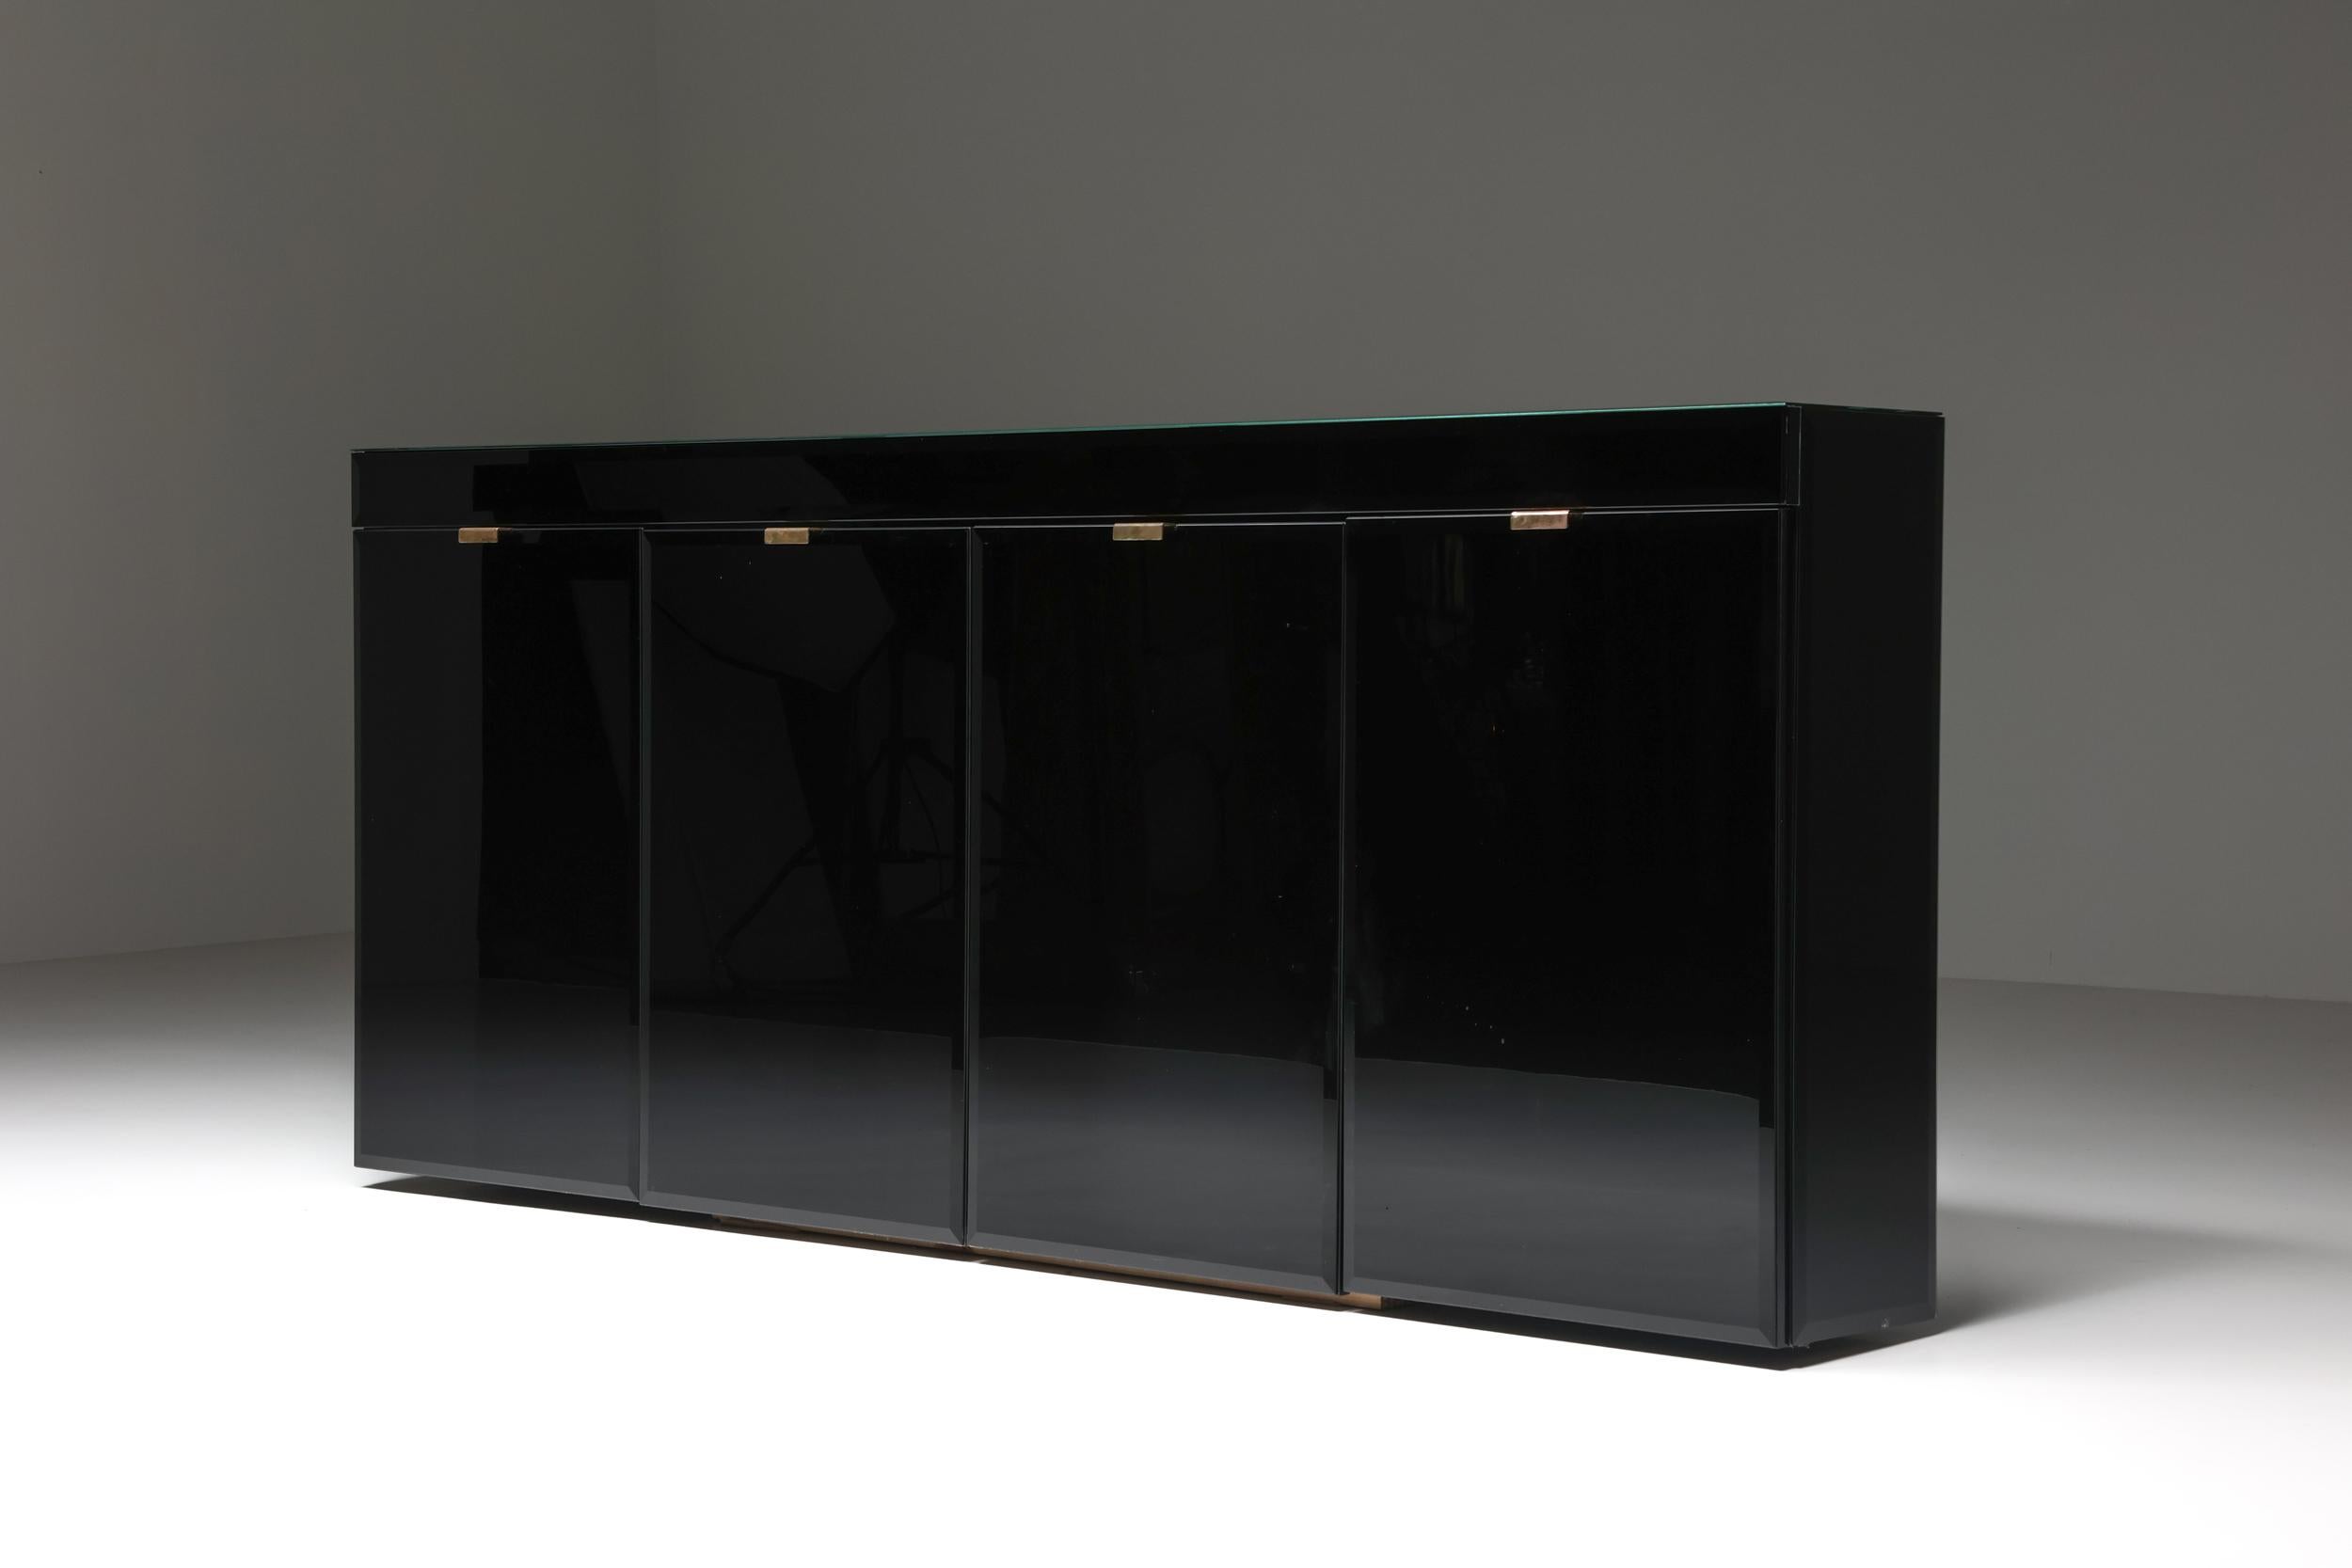 Willy Rizzo; Romeo Rega; Maison Jansen; Sandro Petti; Hollywood Regency; Sideboard; Credenza; Italian Glam; Storage piece; 

Maison Jansen style Hollywood Regency four-door sideboard. The remarkable detail and quality make this a very elegant